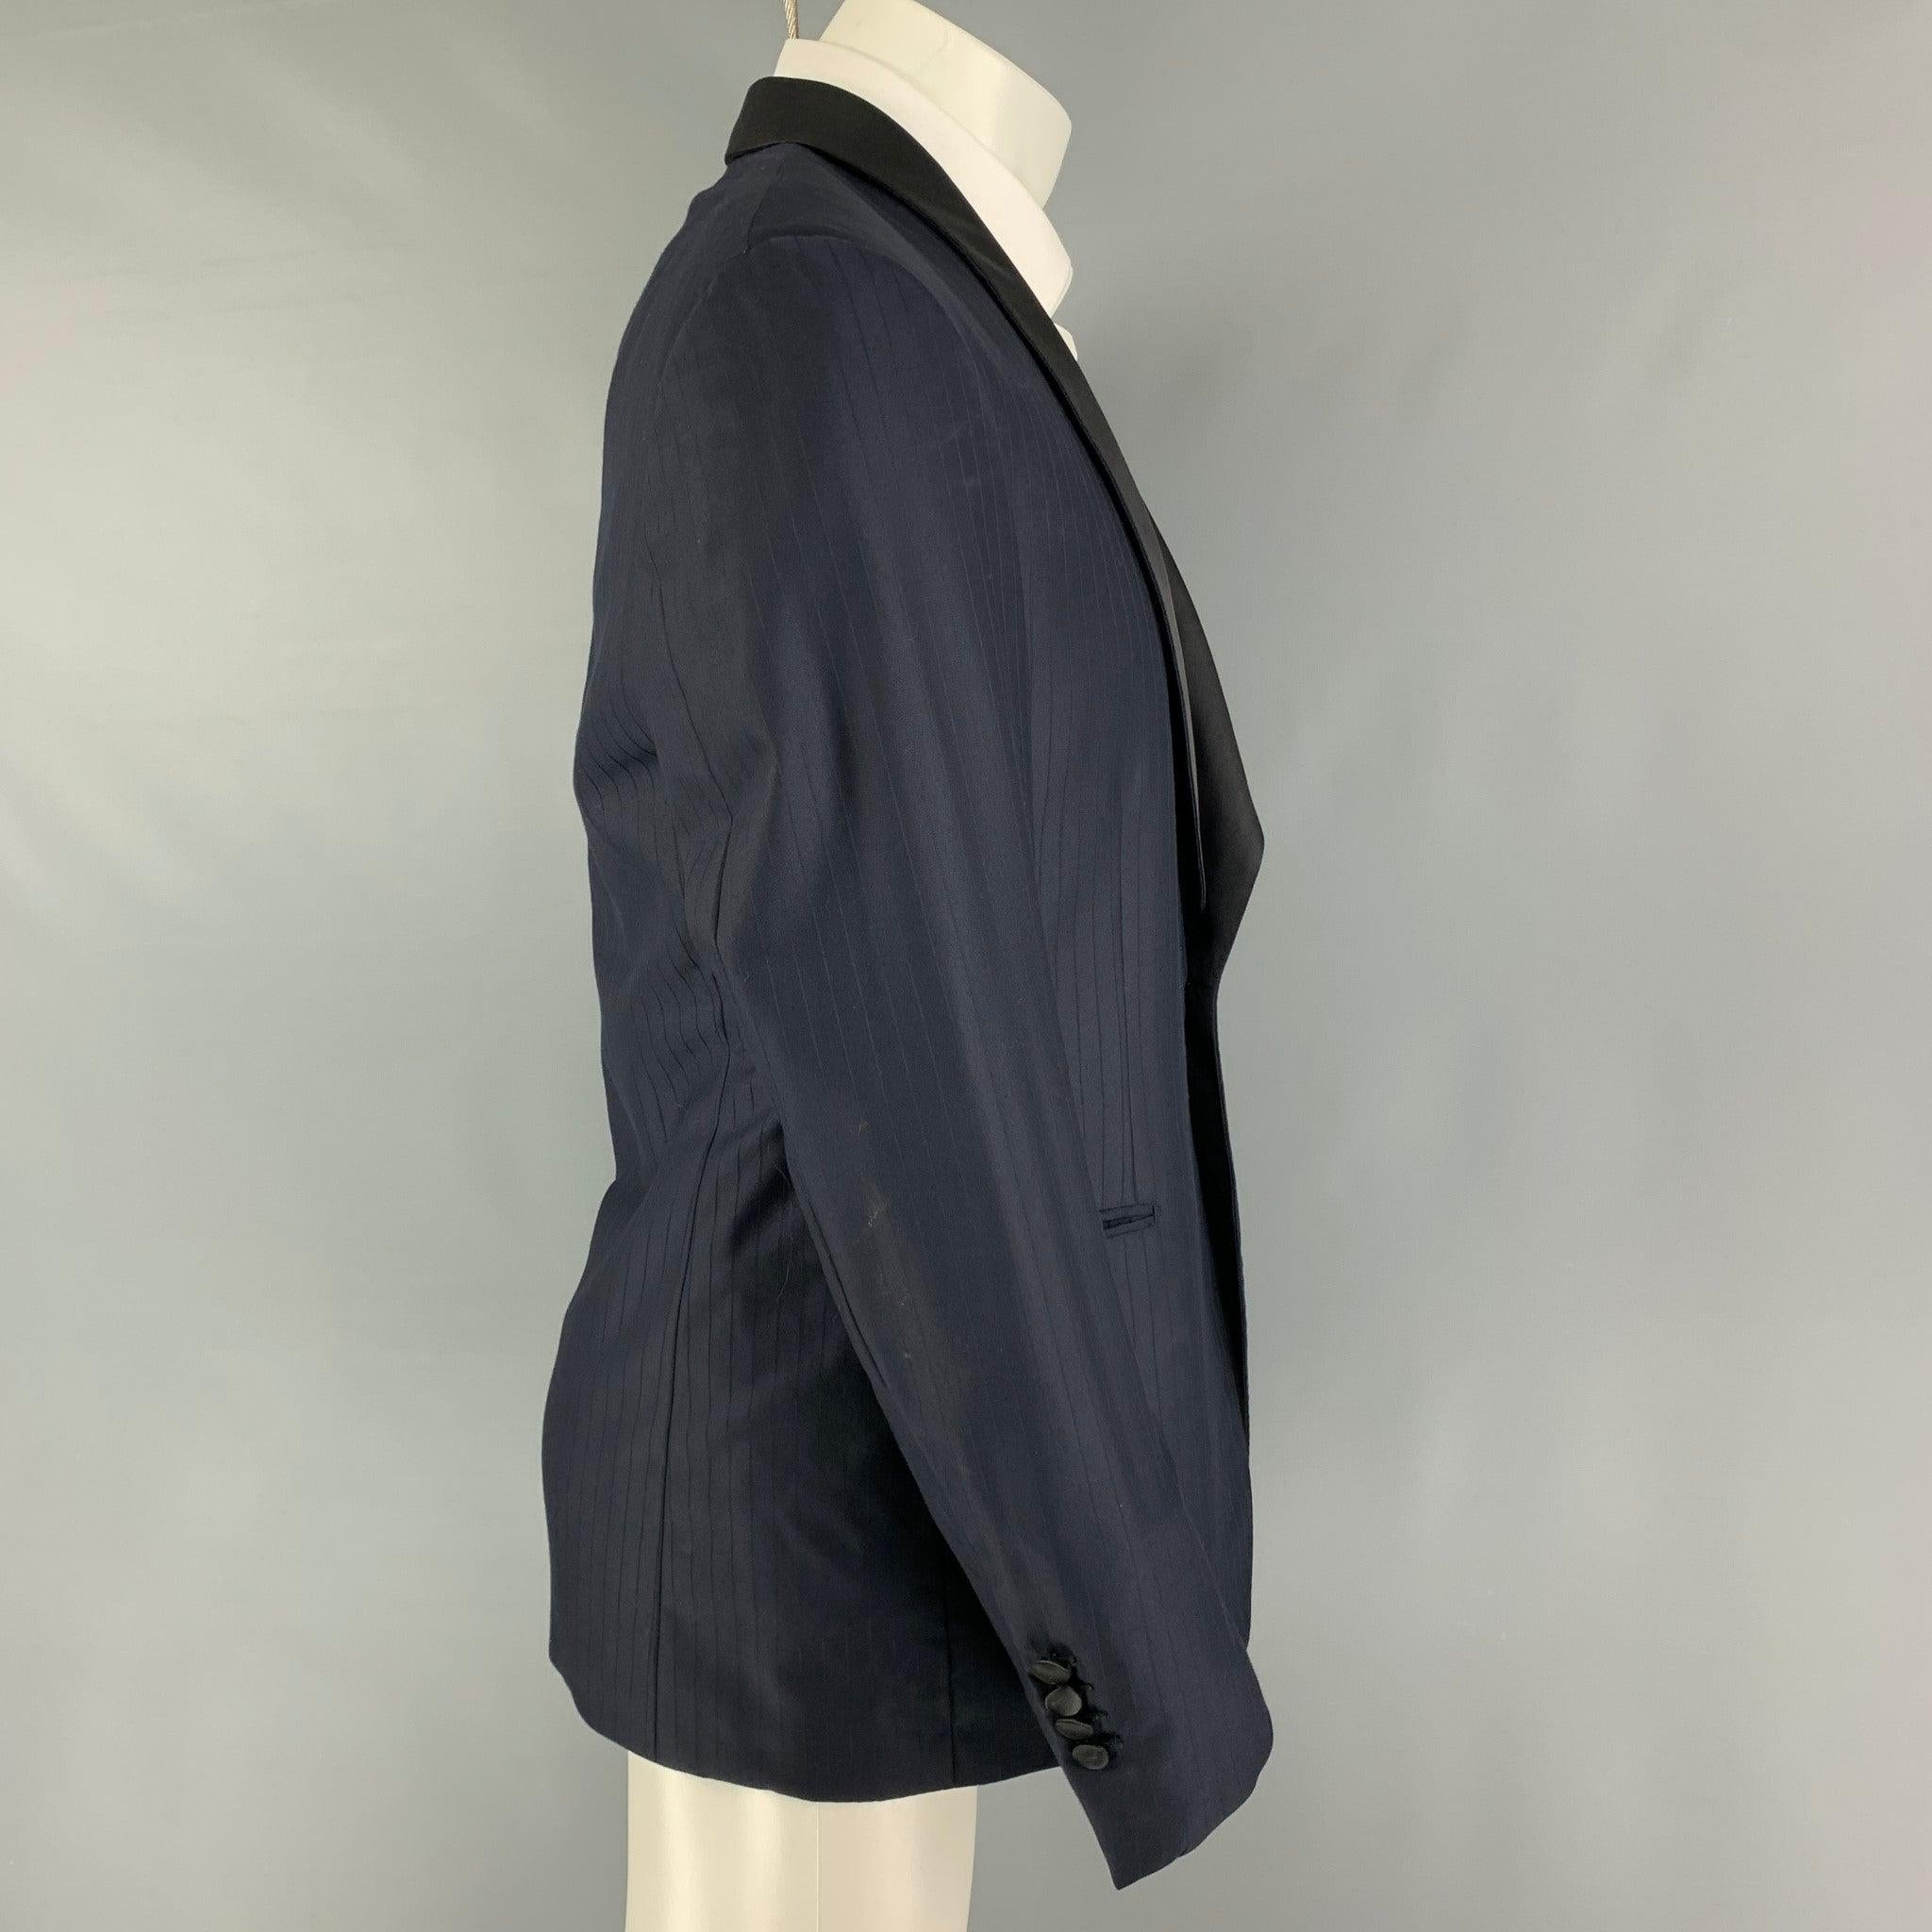 BRIONI
tuxedo sport coat comes in a navy stripe wool with a full liner featuring a shawl collar, slit pockets, and a single button closure.
Excellent
Pre-Owned Condition. 

Marked:   50 R  

Measurements: 
 
Shoulder: 17.5 inches Chest: 40 inches